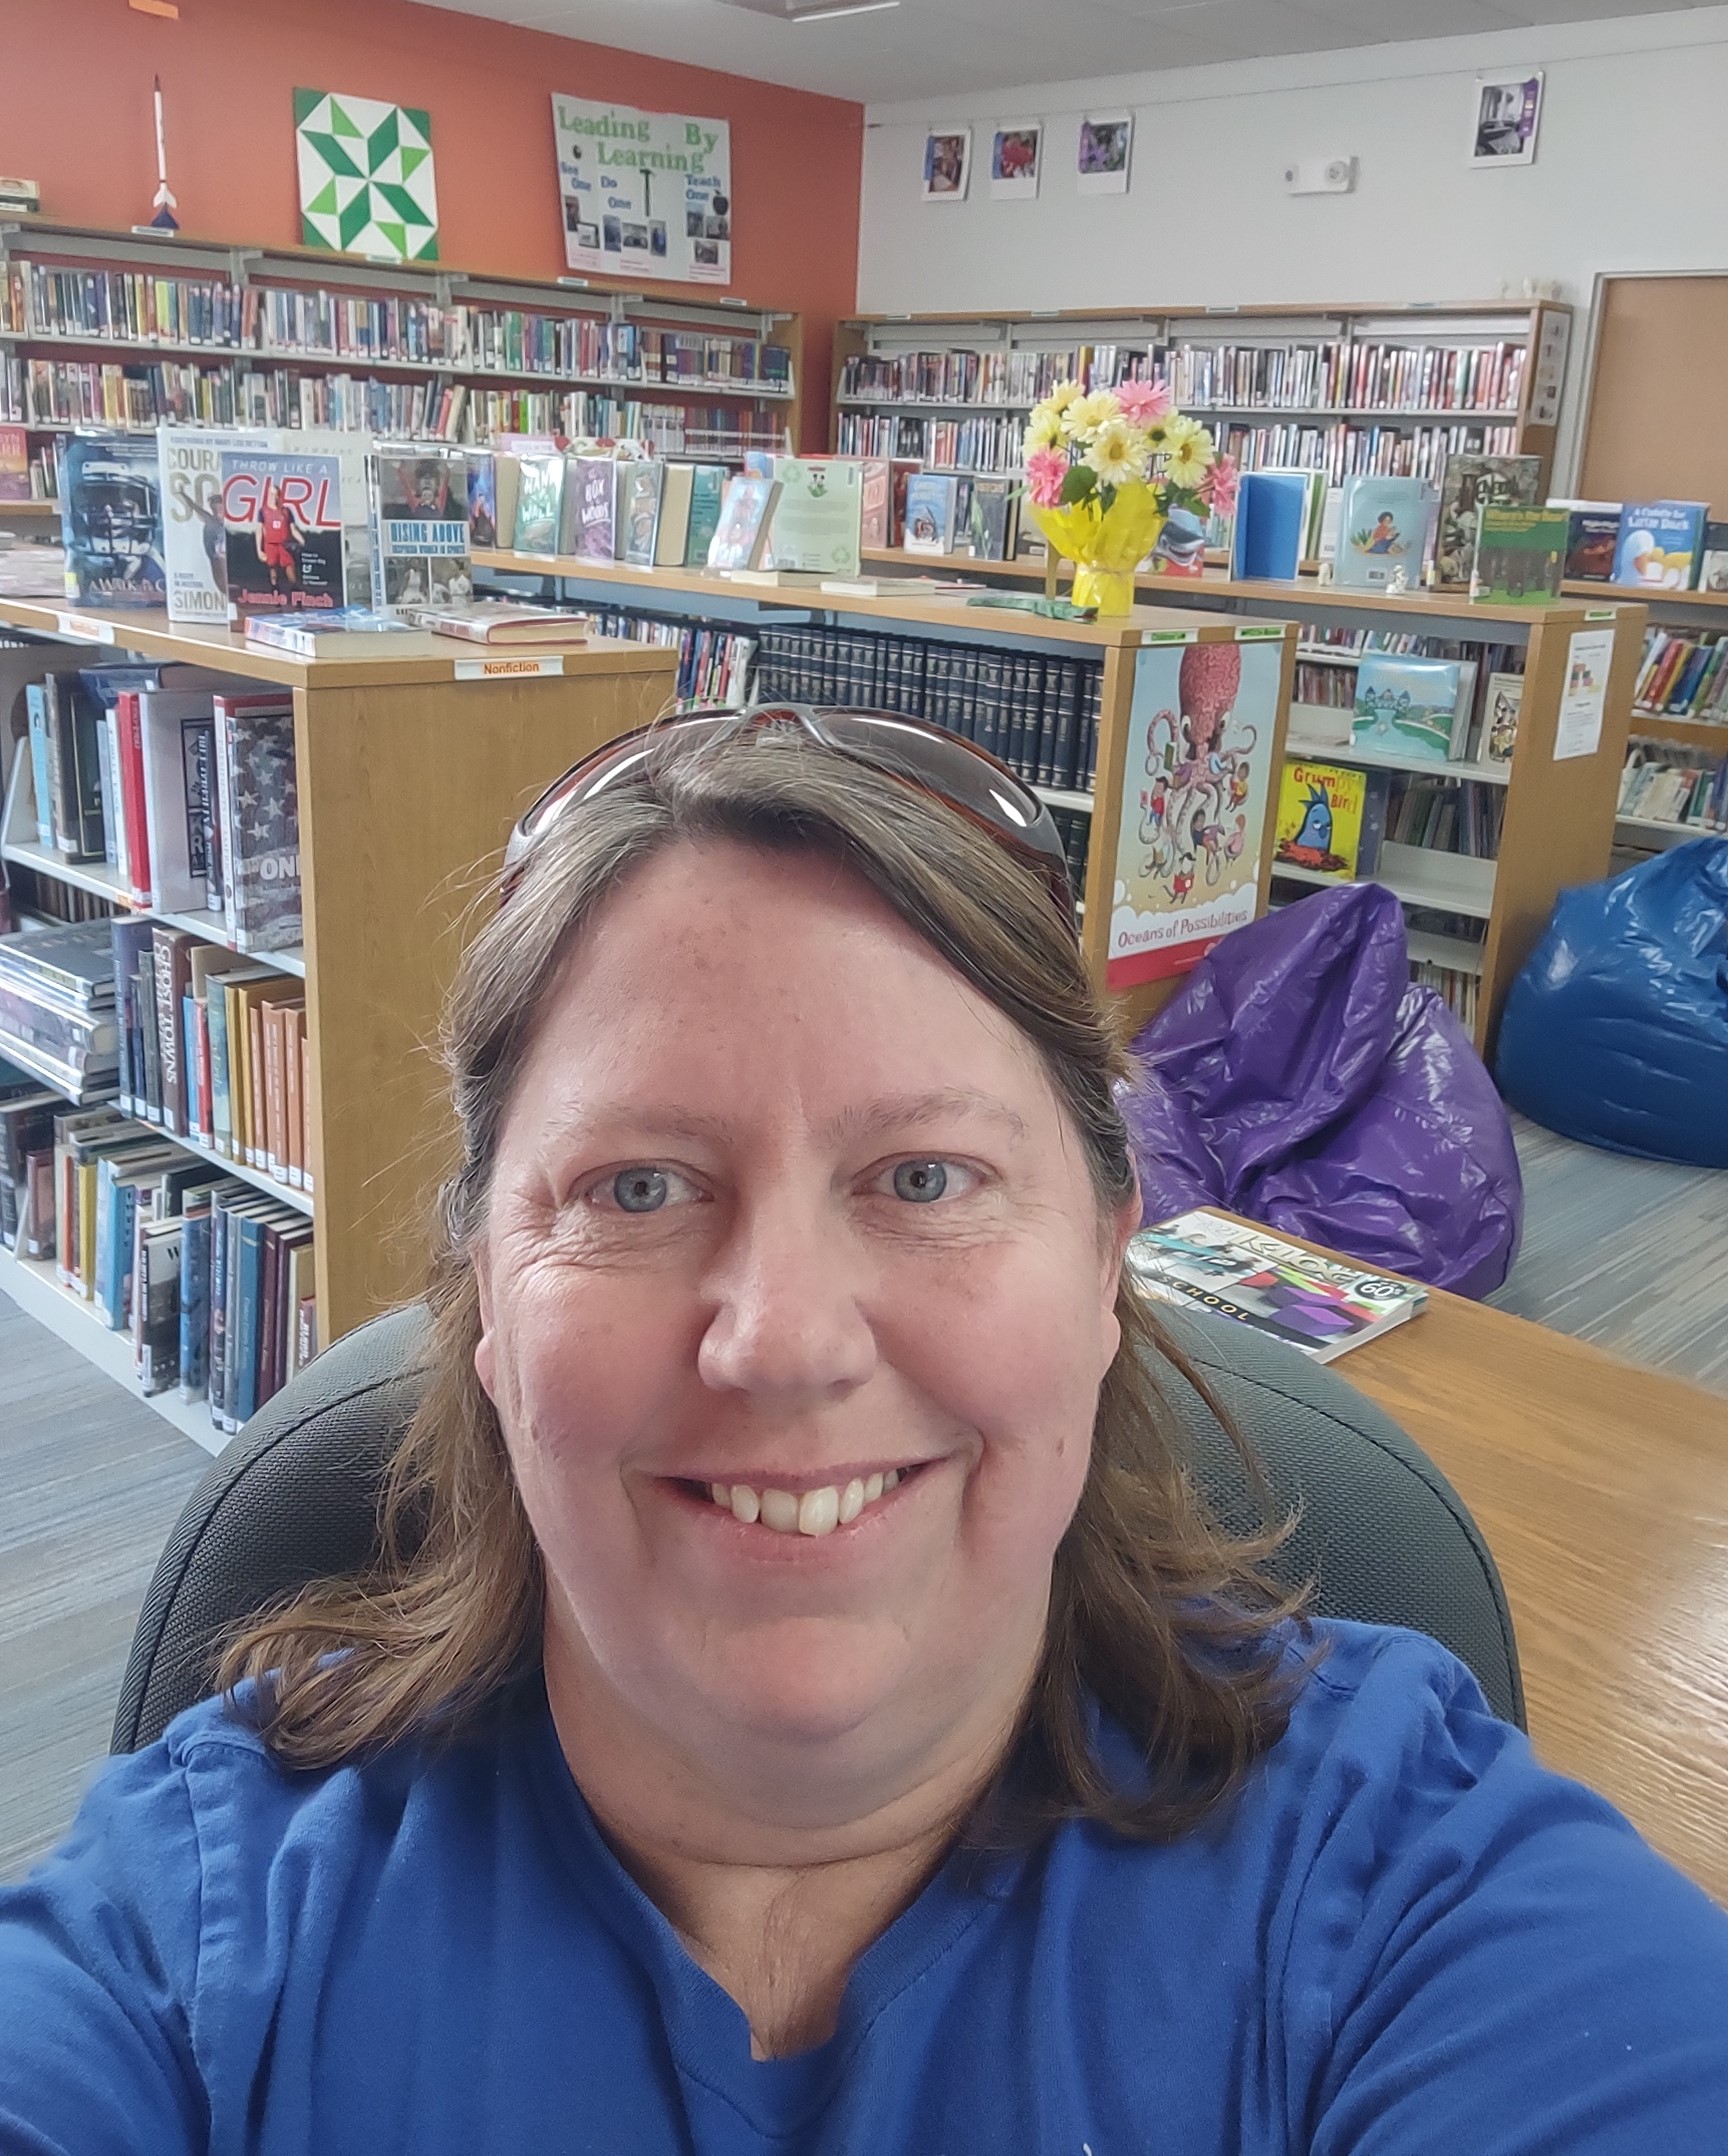 Smiling woman with brown hair and sunglasses on top of her head wearing a blue shirt in a library.